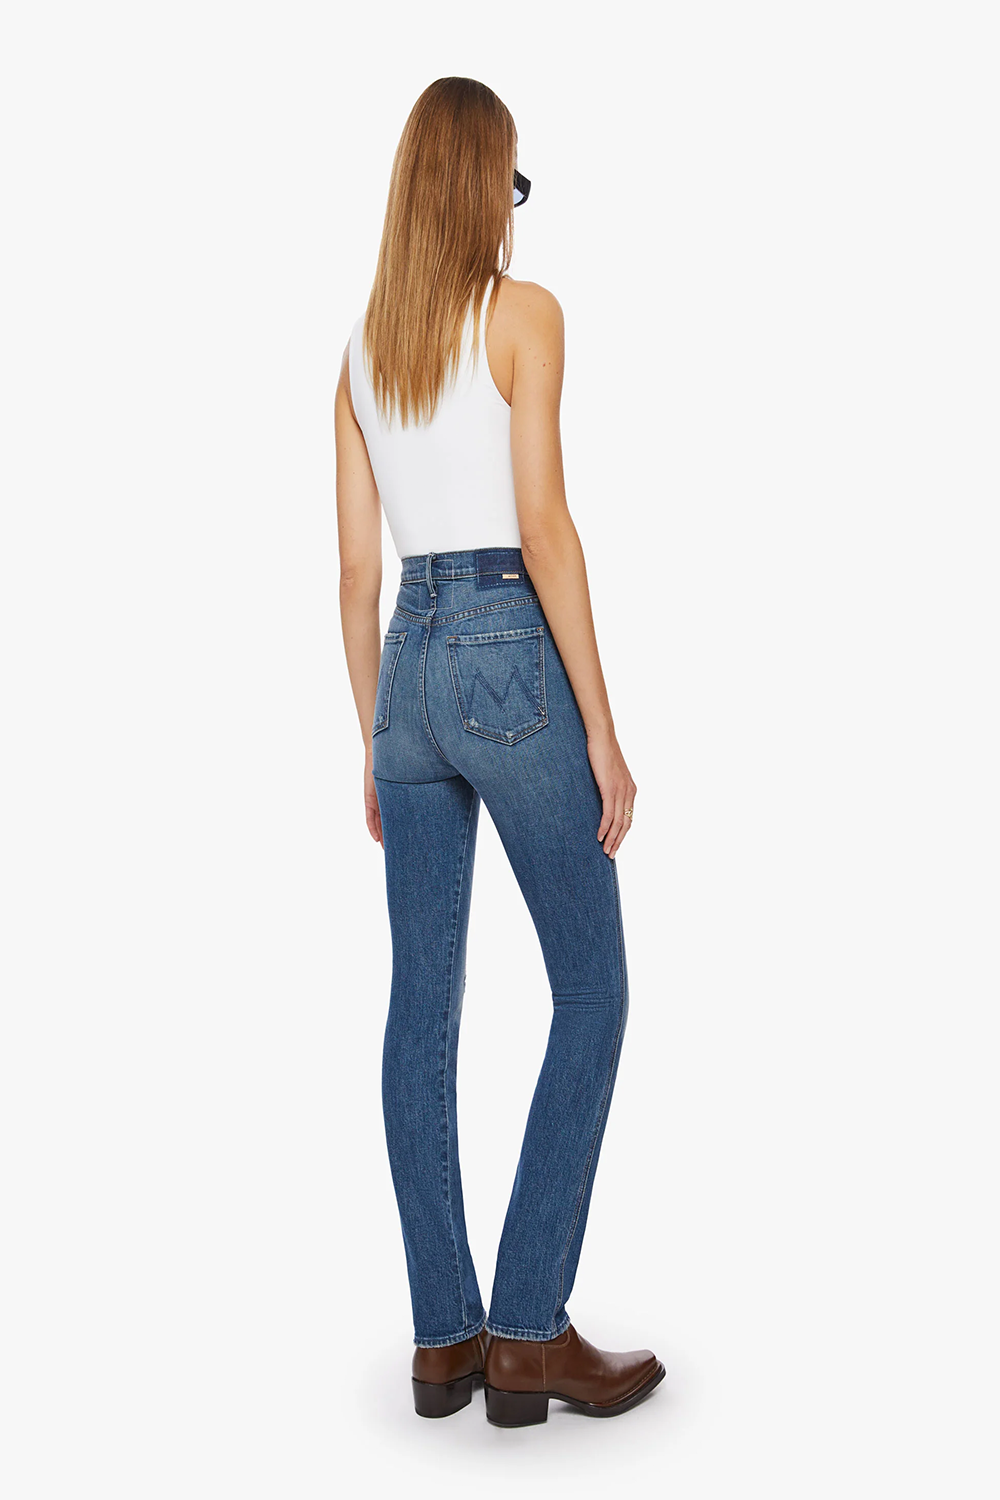 High Waisted Dazzler Jean in Morning Chores